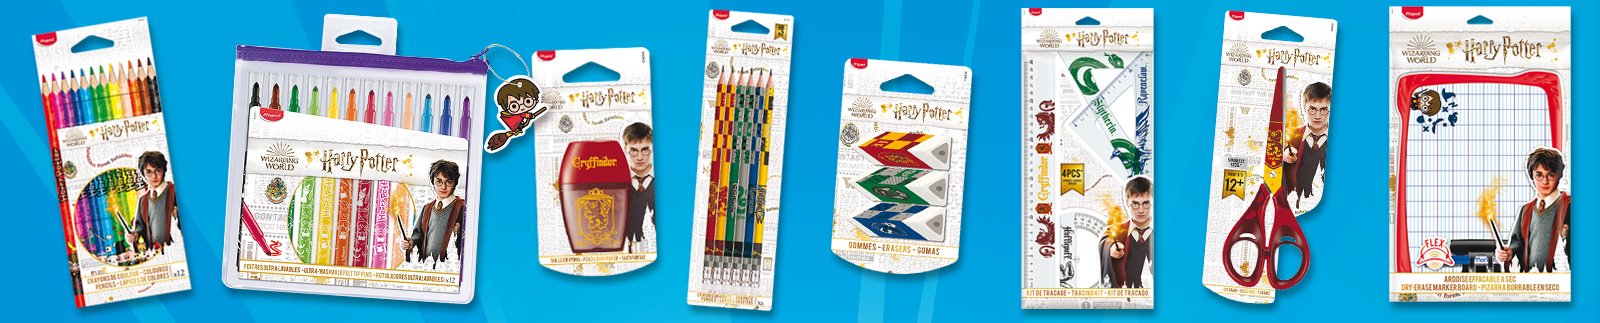 Harry Potter banner Maped